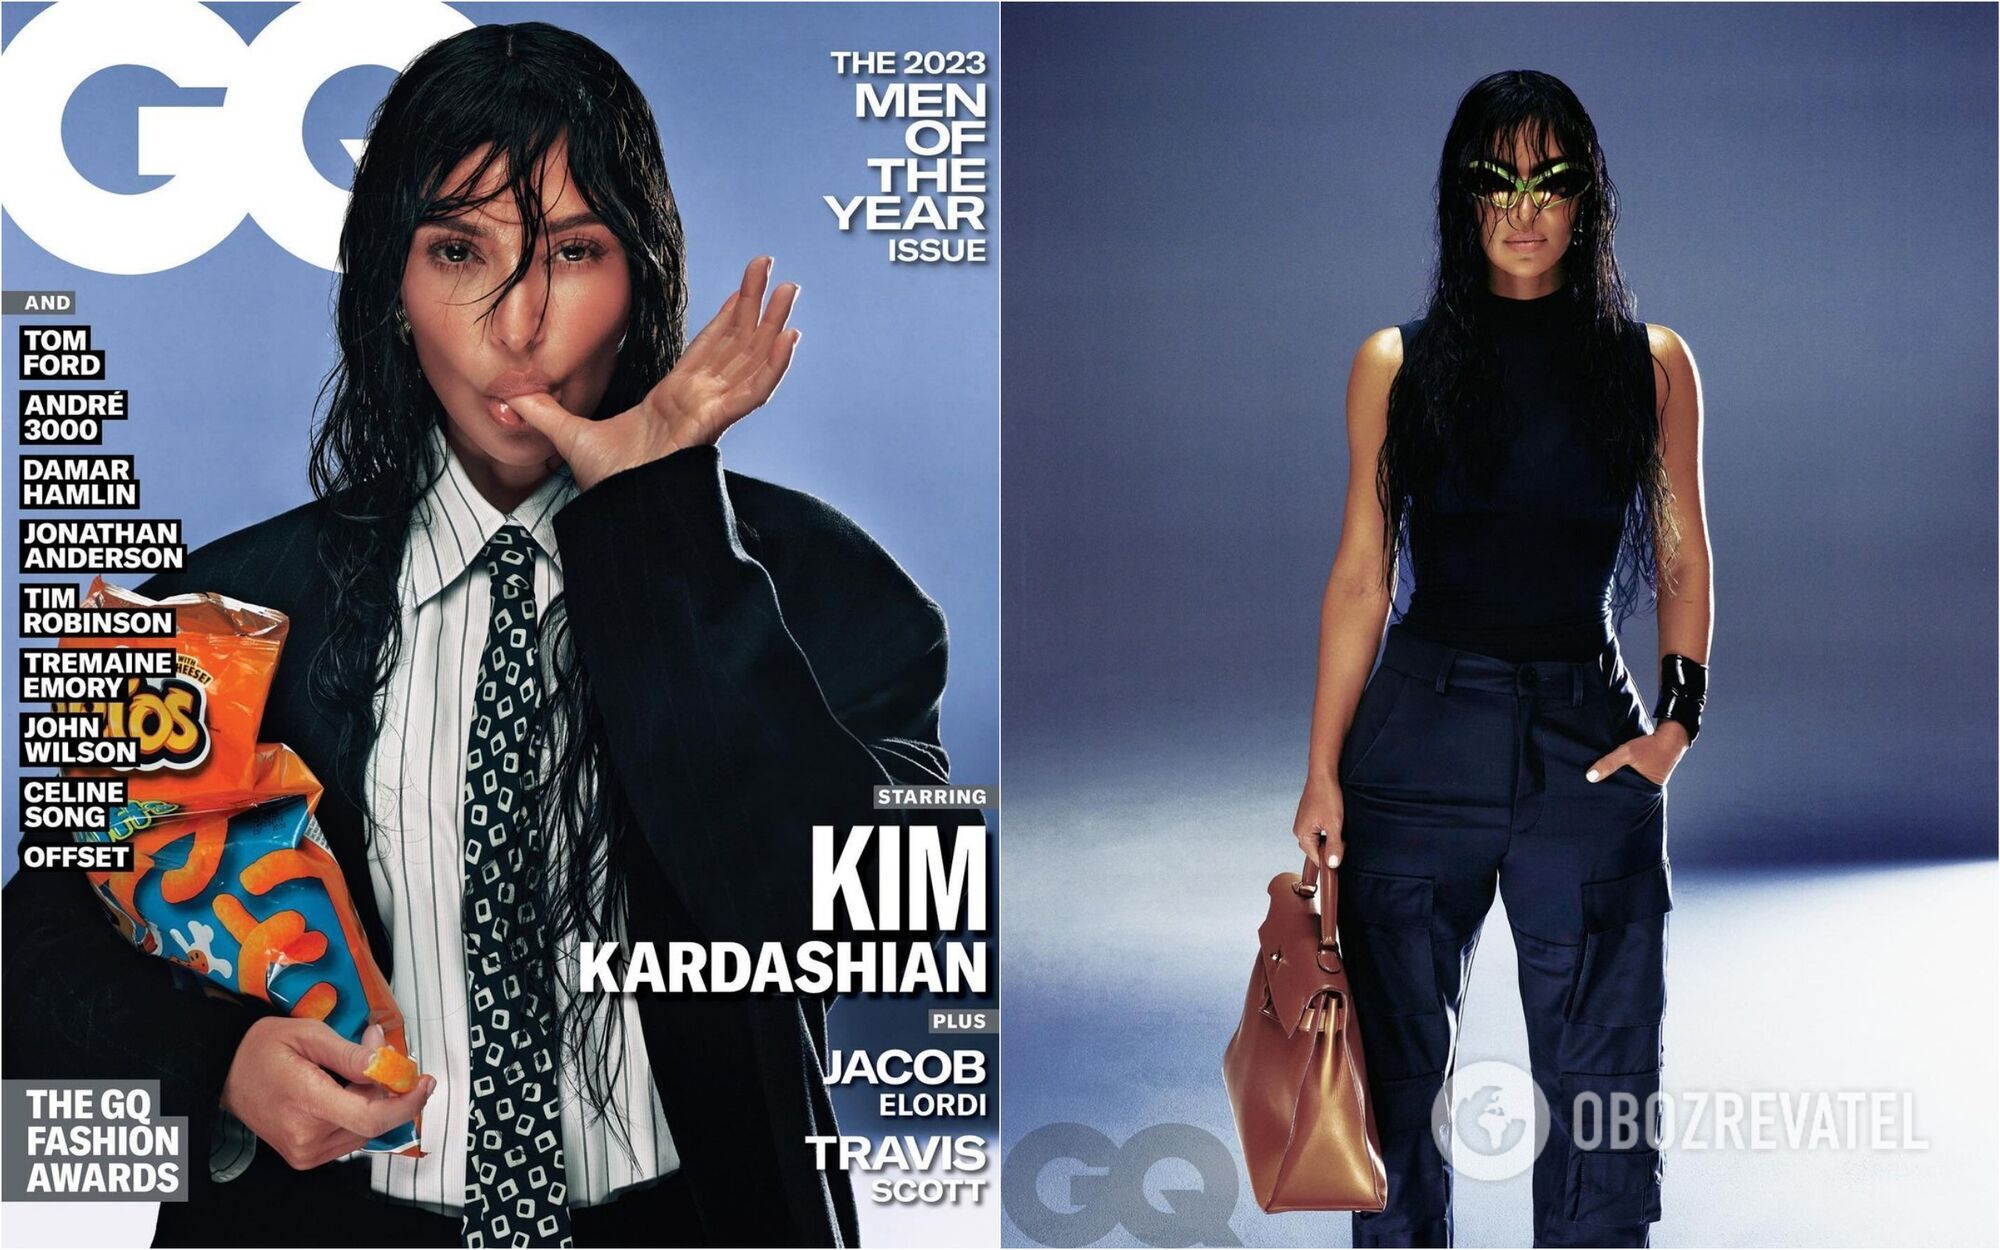 Kim Kardashian Who Was Named Man Of The Year By Gq Stunned Fans With Makeover Shes Now